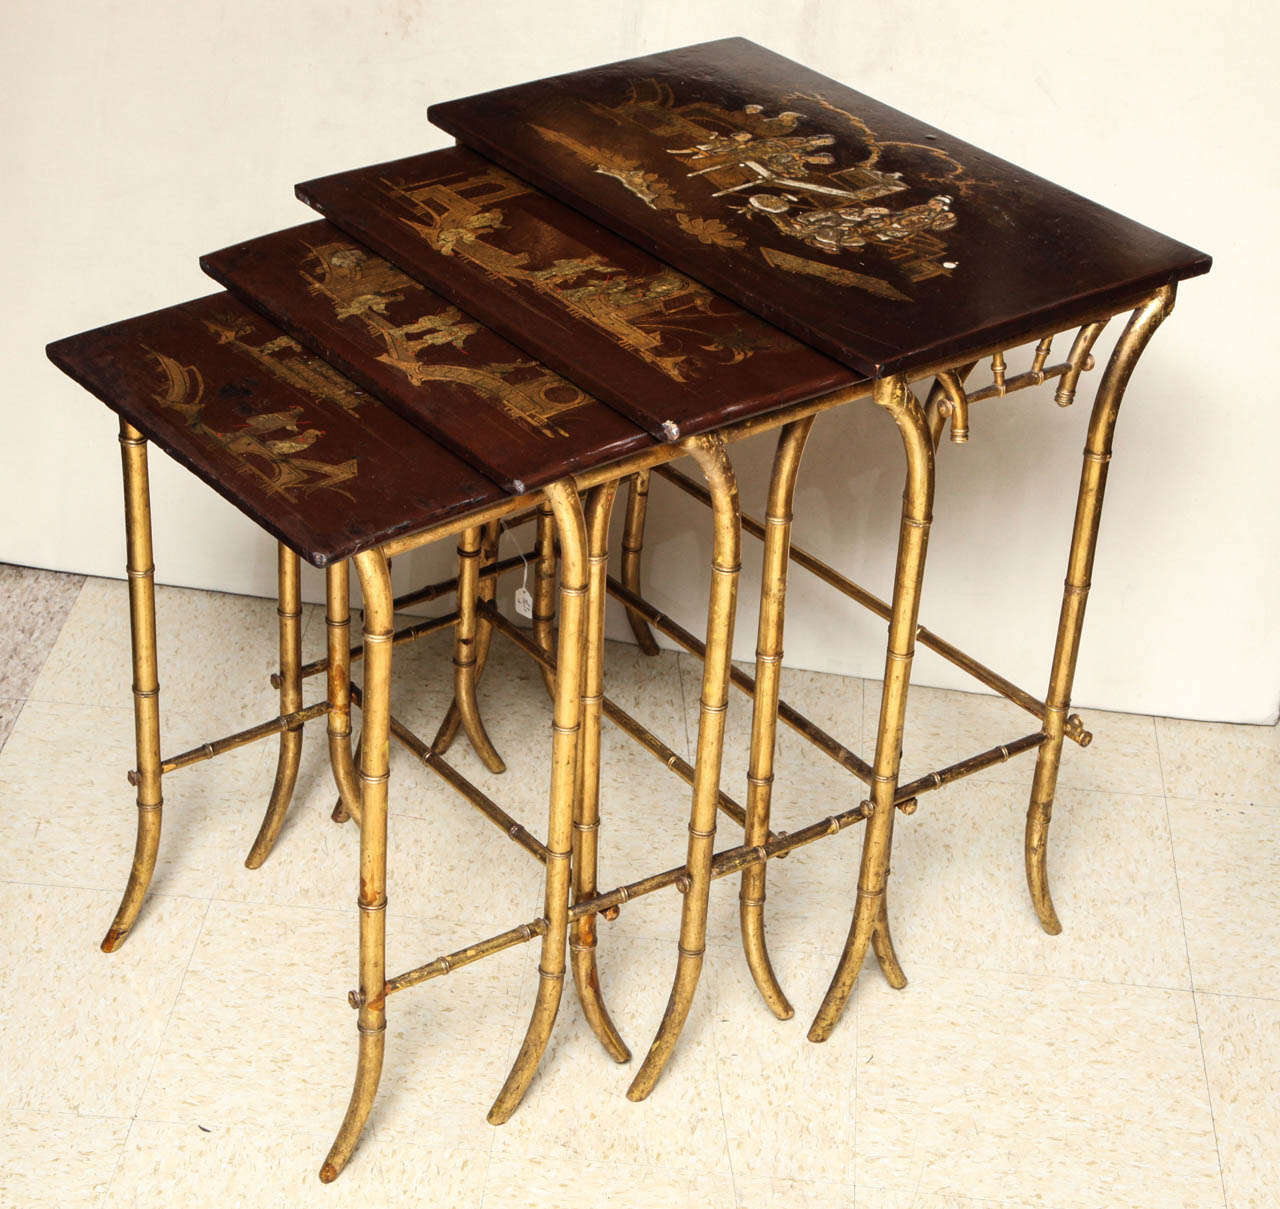 Chinoiserie set of four Jappaned laquer top nesting tables with bamboo legs
Stock Number: F92